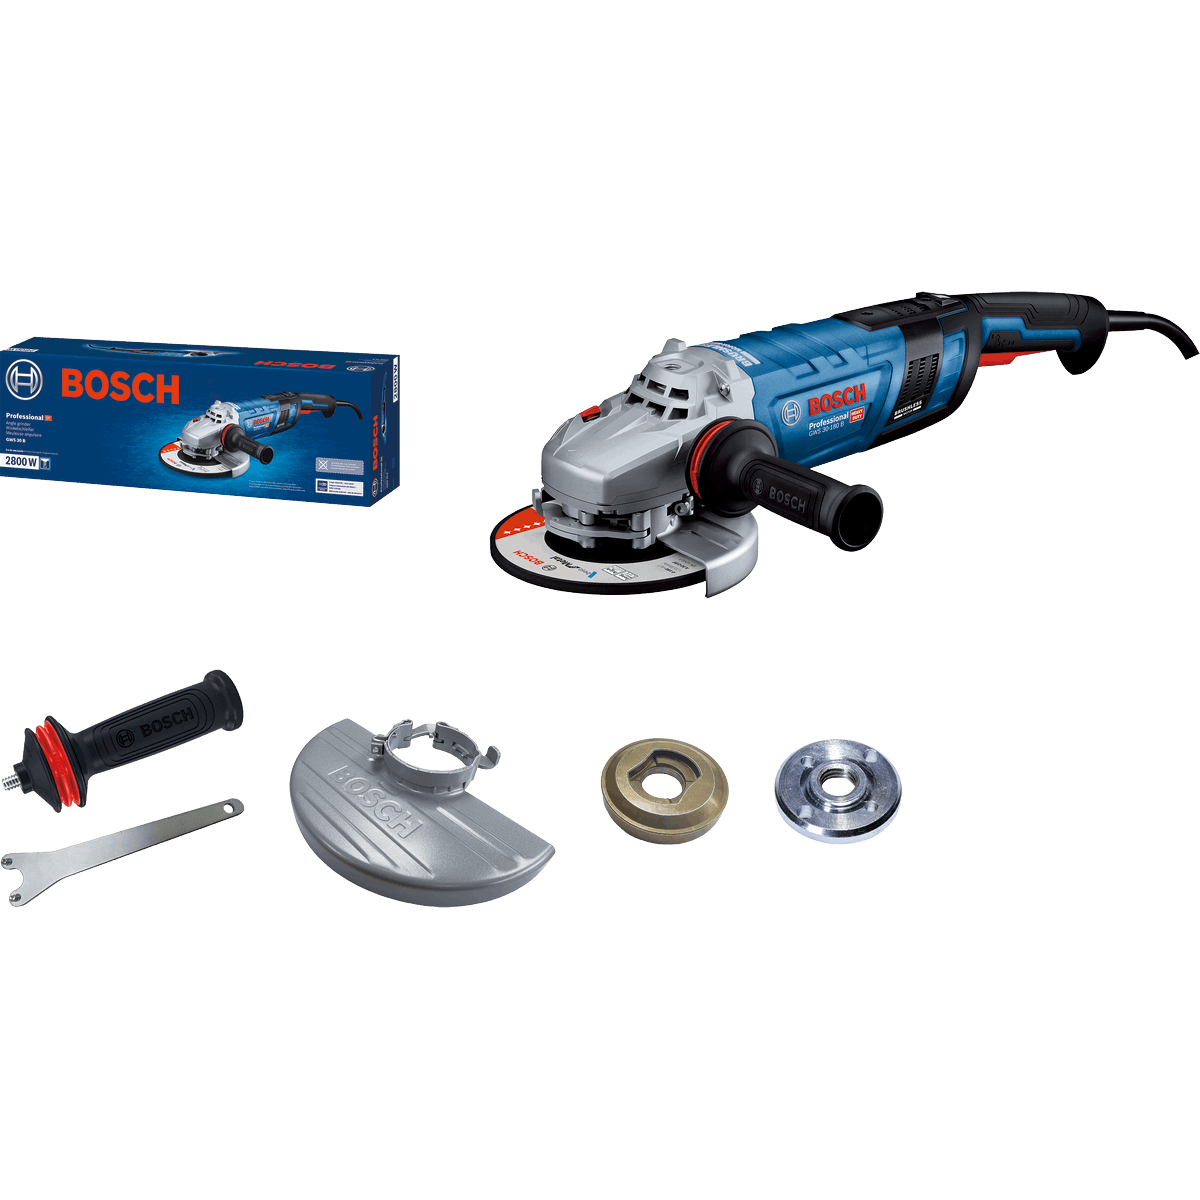 Bosch Professional Angle Grinder GWS 30-230 PB 06018G1100 Power Tool Services